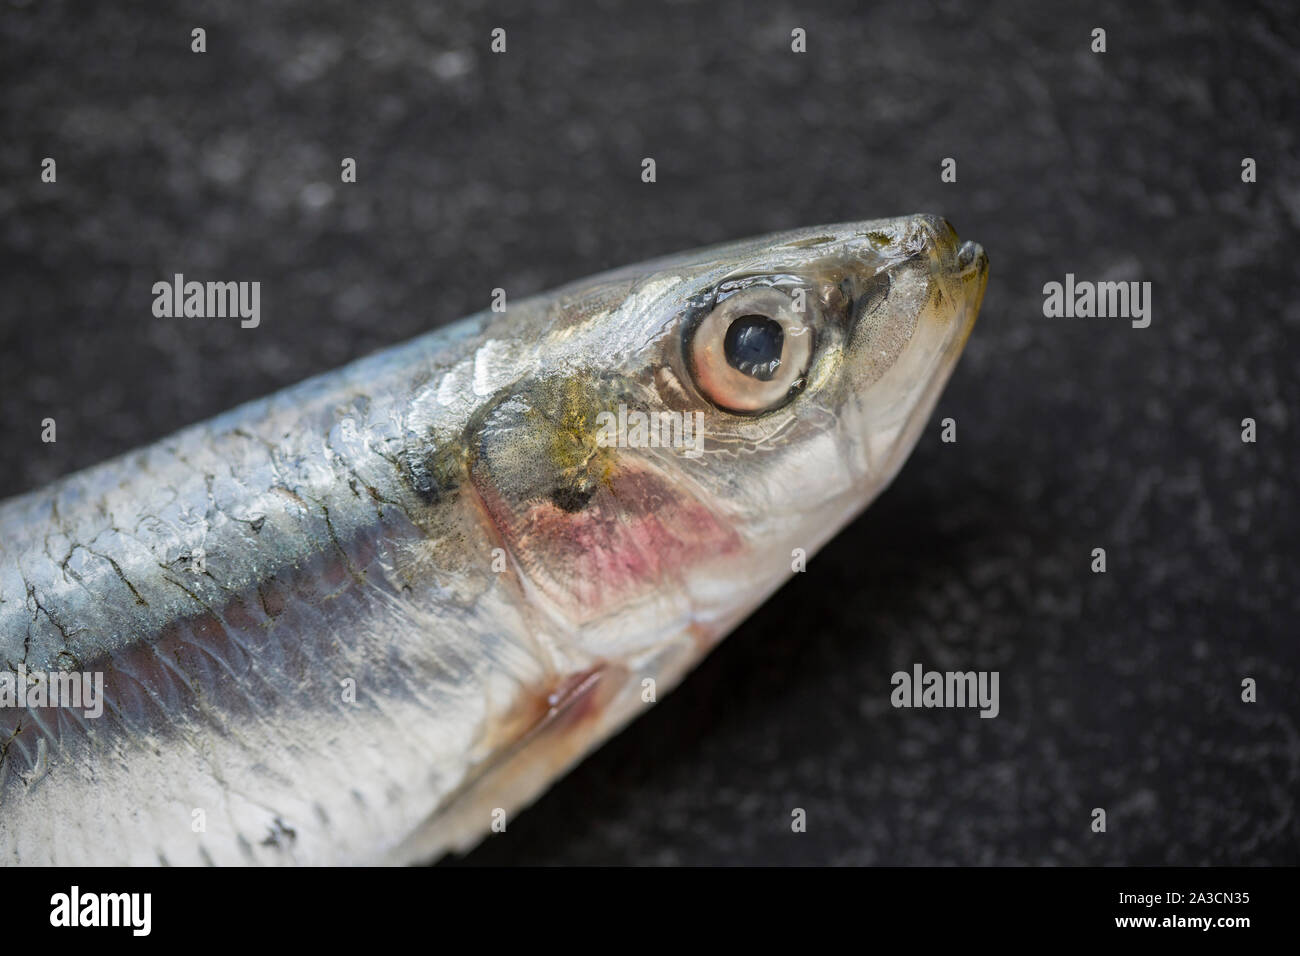 A single raw, uncooked Cornish sardine, Sardina pilchardus, bought from a supermarket in the UK. In the UK sardines above a certain size are known as Stock Photo